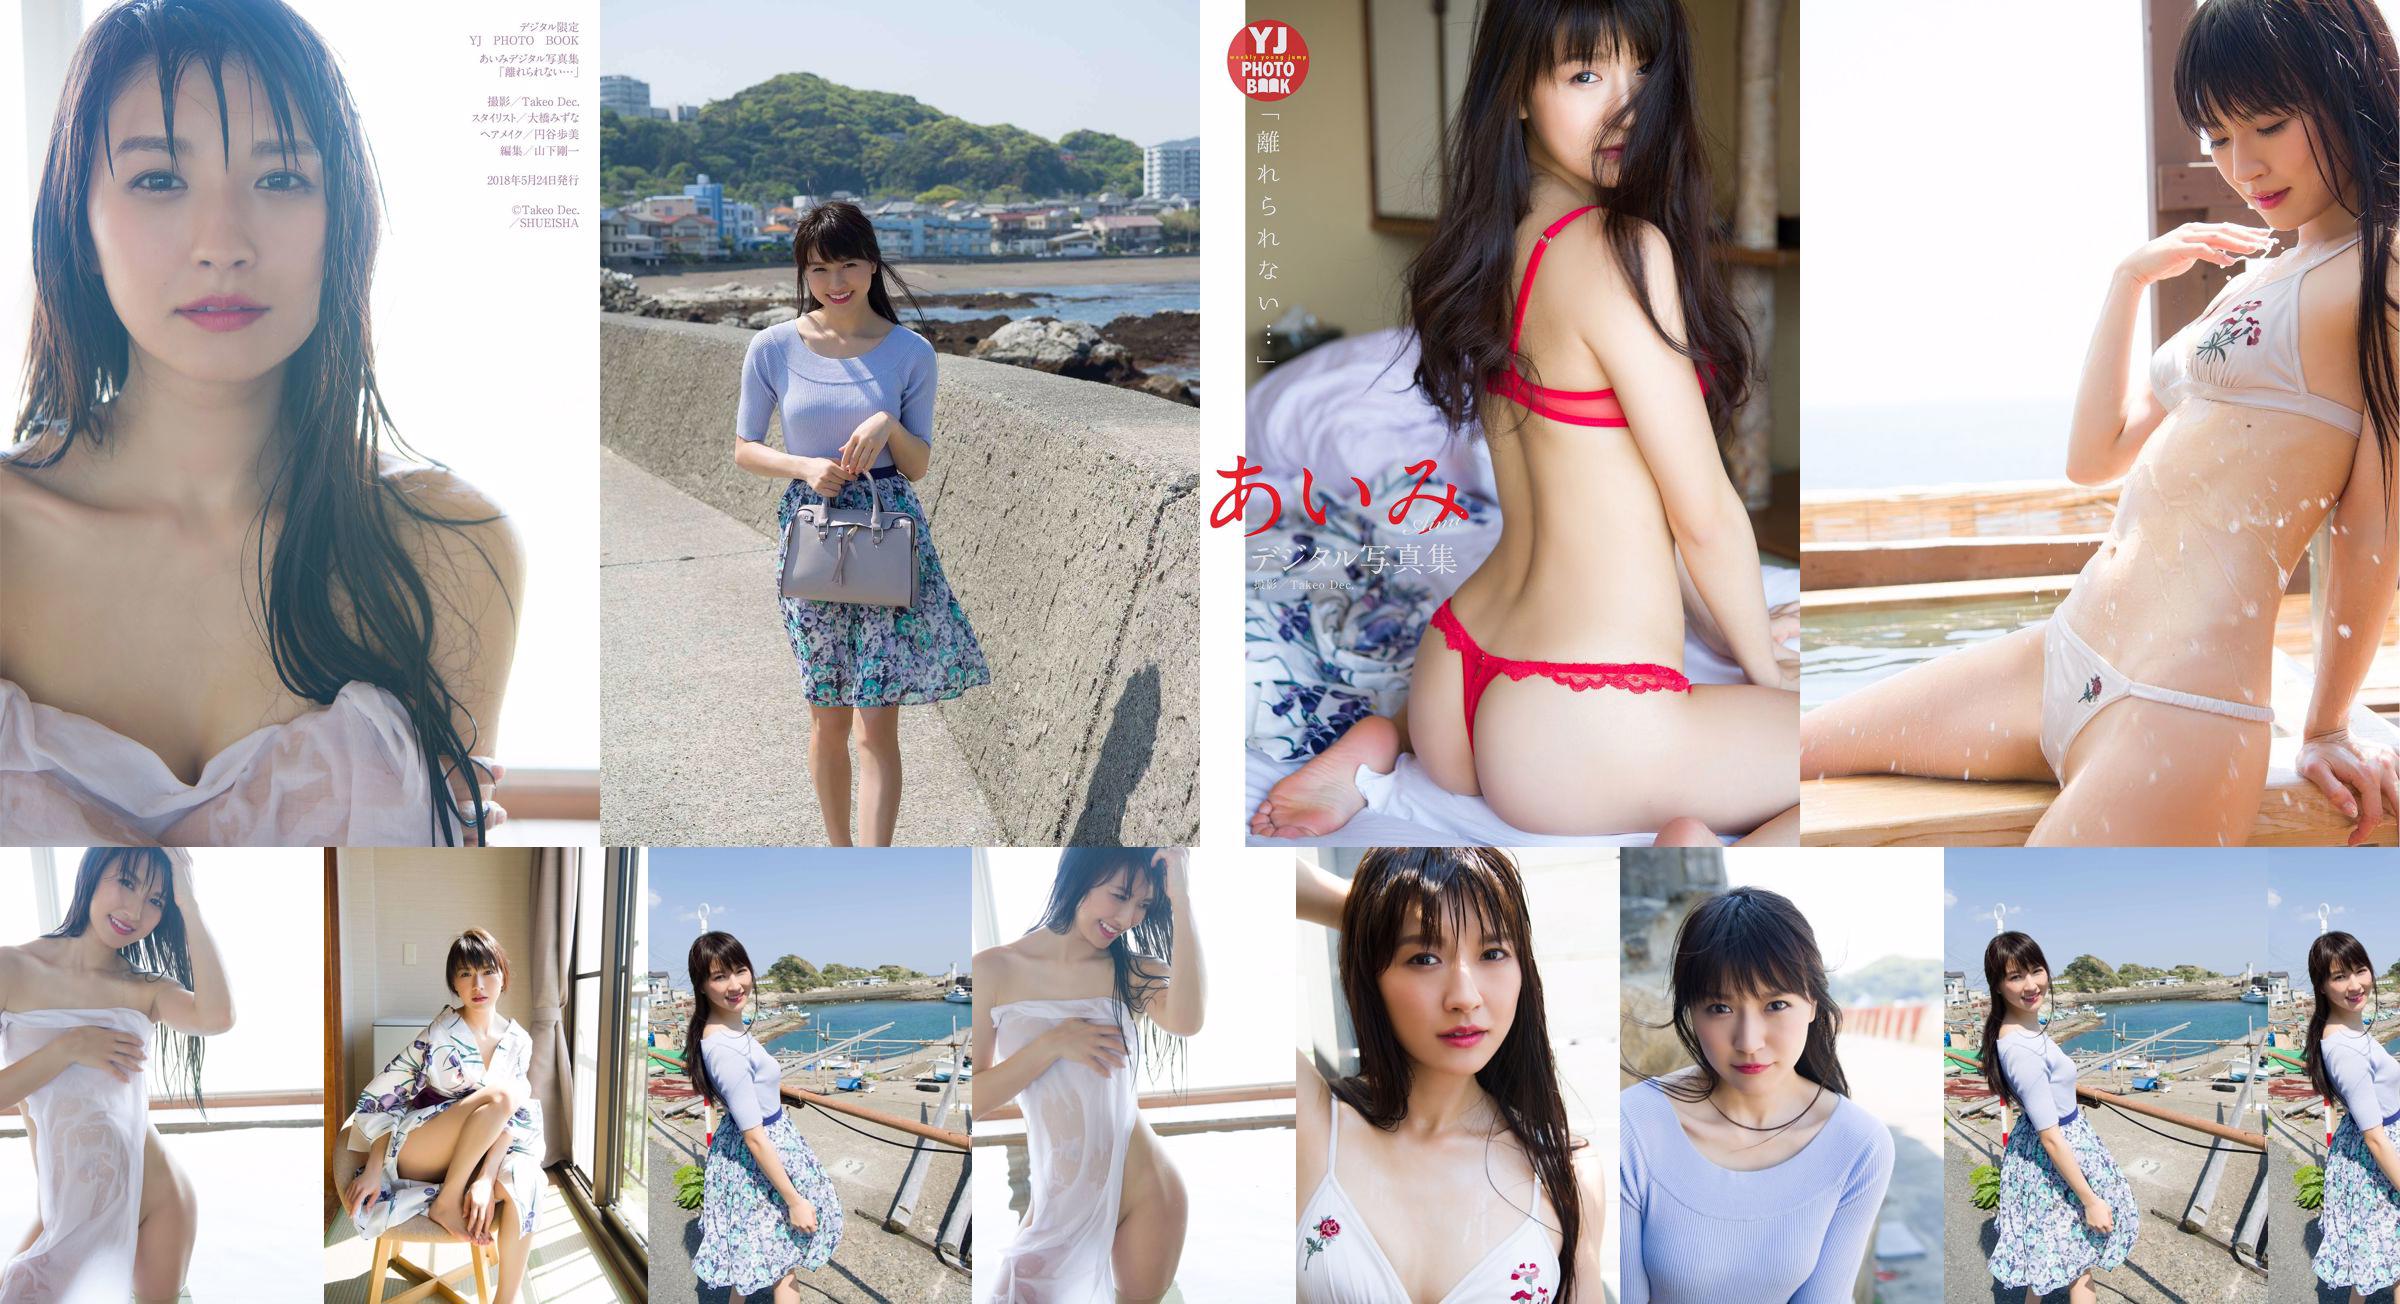 Aimi Nakano "I can't leave ..." [Digital Limited YJ PHOTO BOOK] No.dc3a82 Page 4